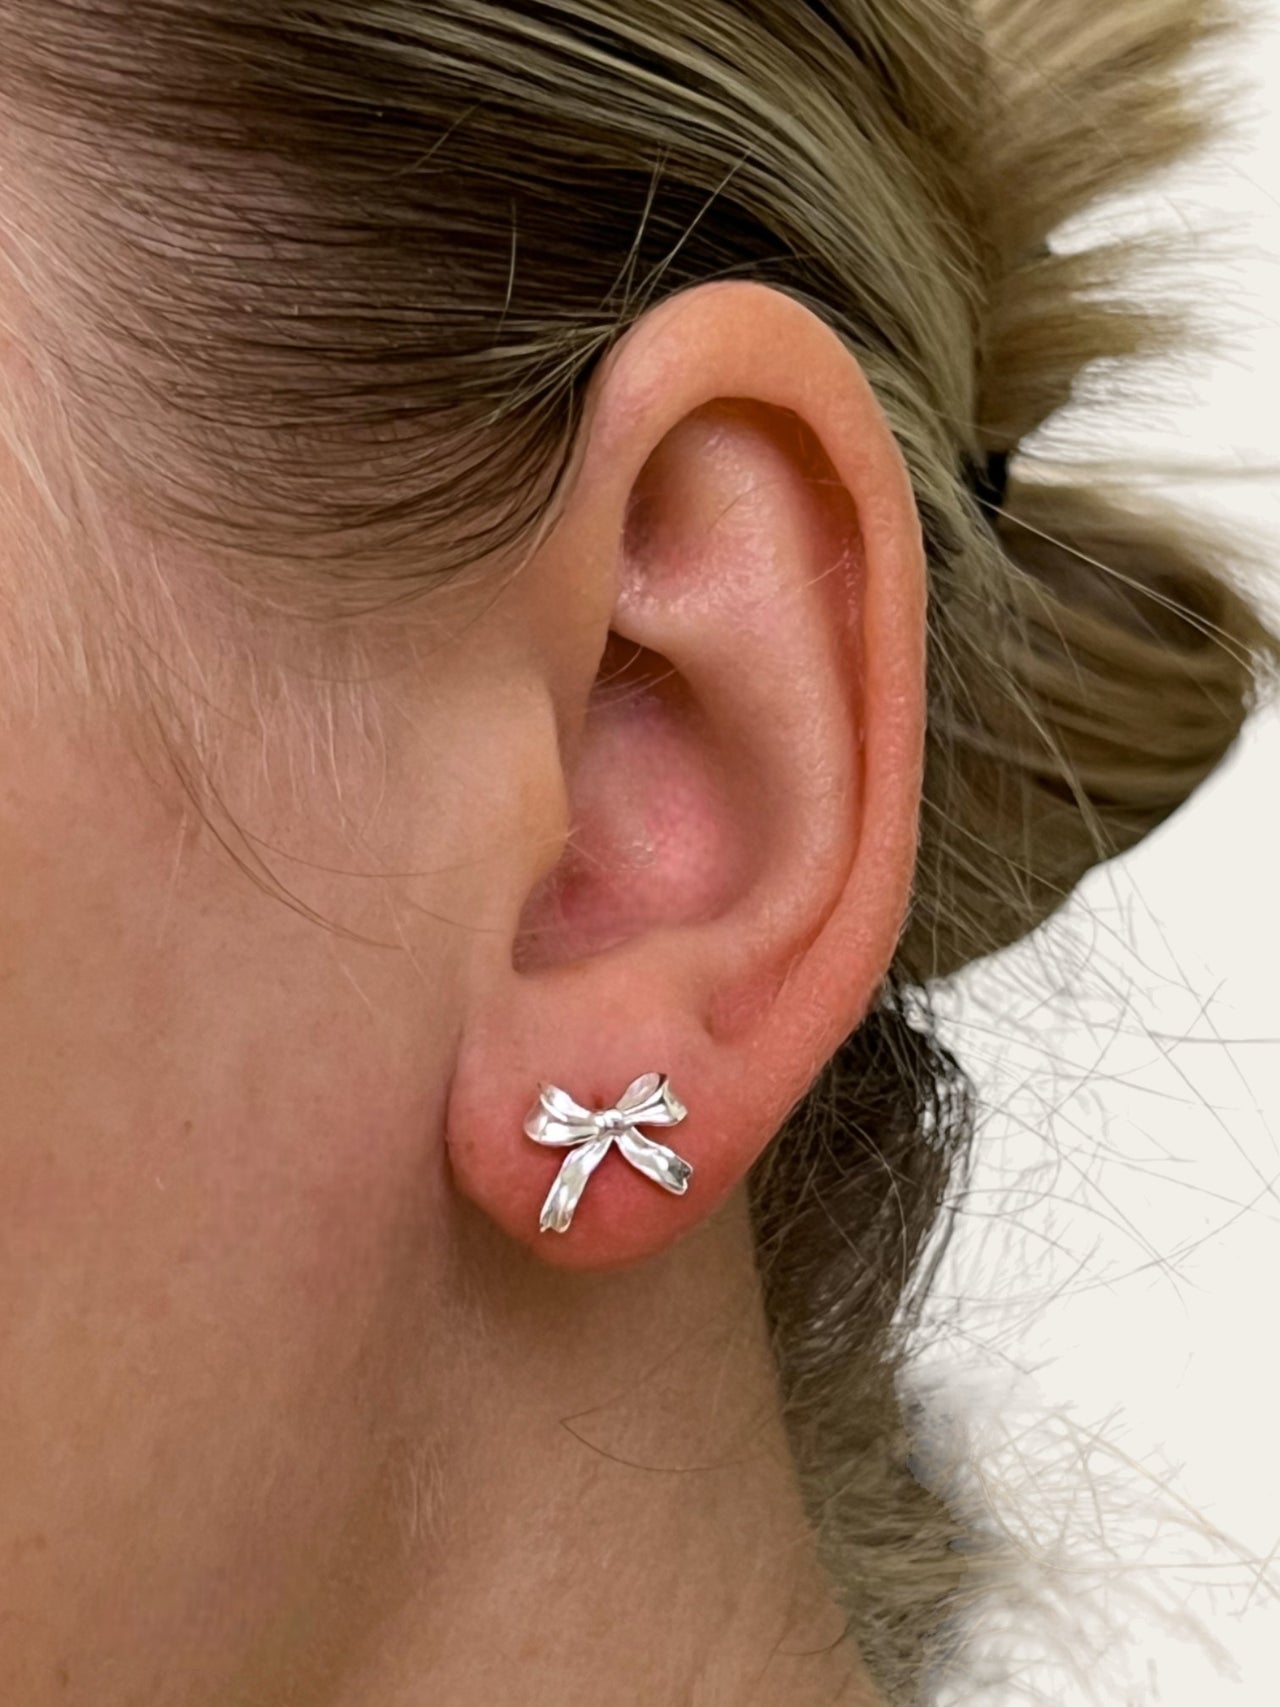 Chunky Micro Bow Studs - Silver